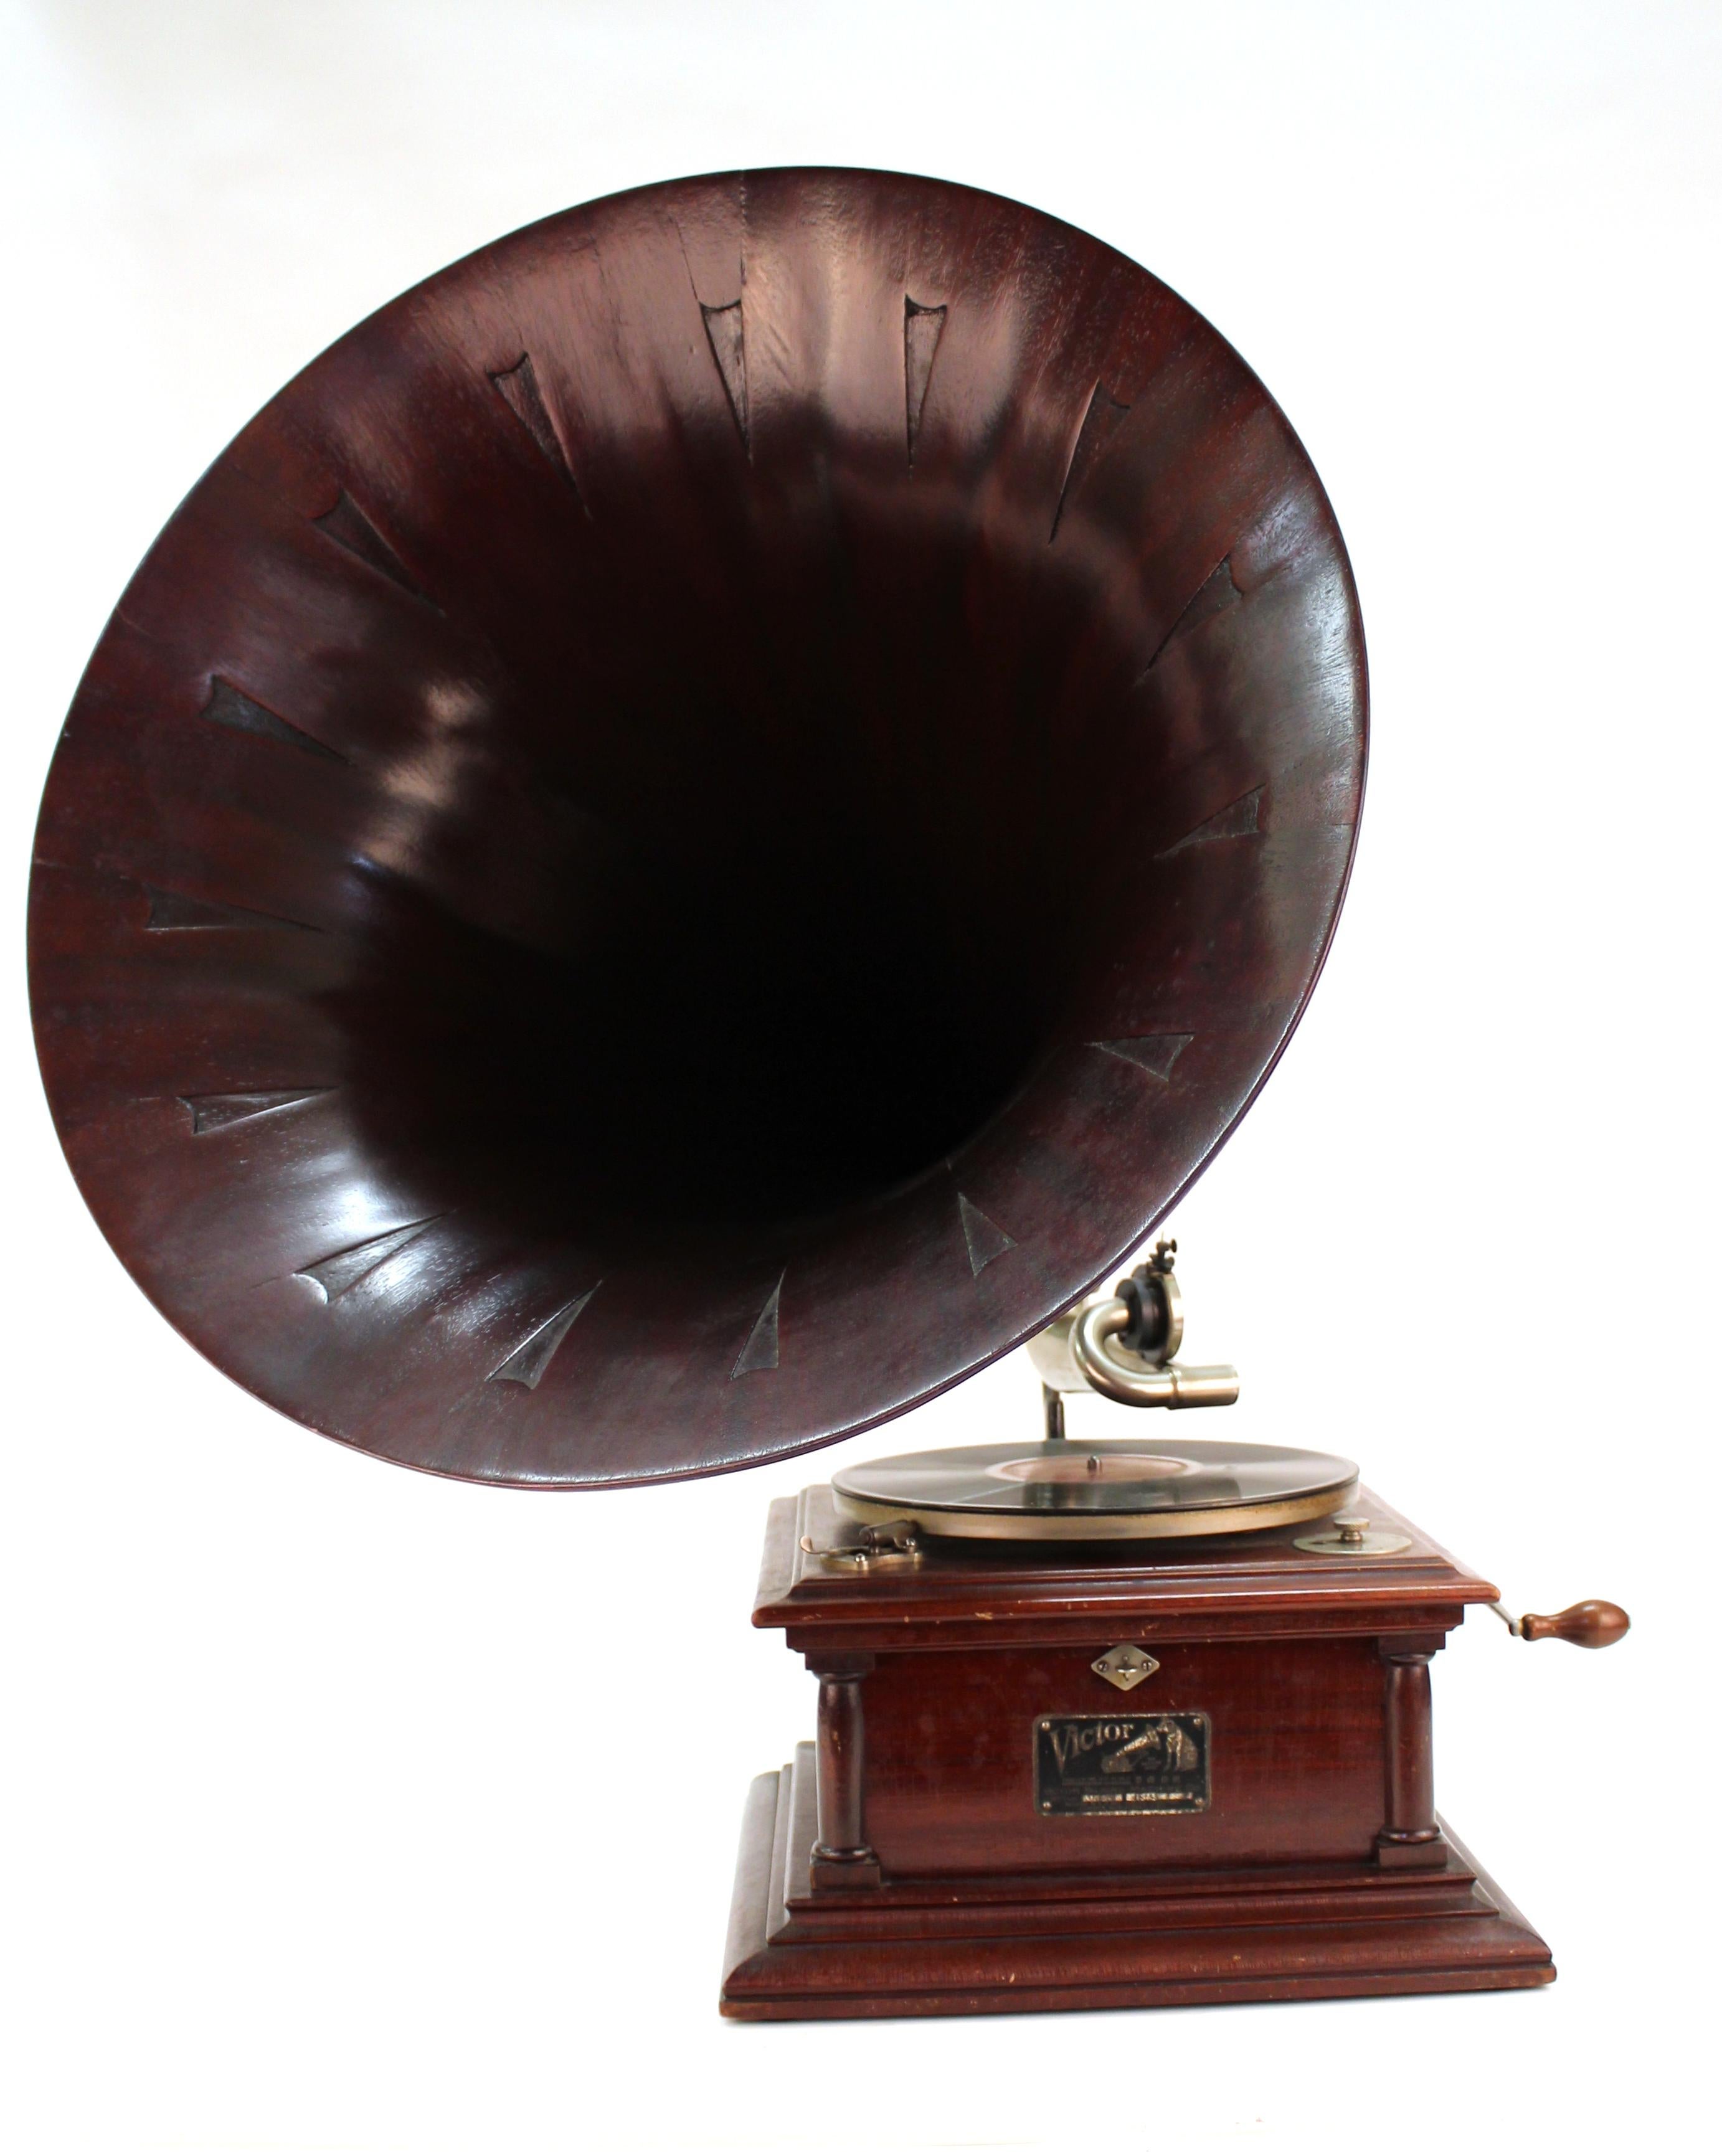 Victor IV phonograph in mahogany, cast iron and nickelled brass, dating from circa 1906-1910, made in the United States by the Victor Phonograph Company. The piece is fully operational and comes with needles and a set of 76 RPM records. Wood and